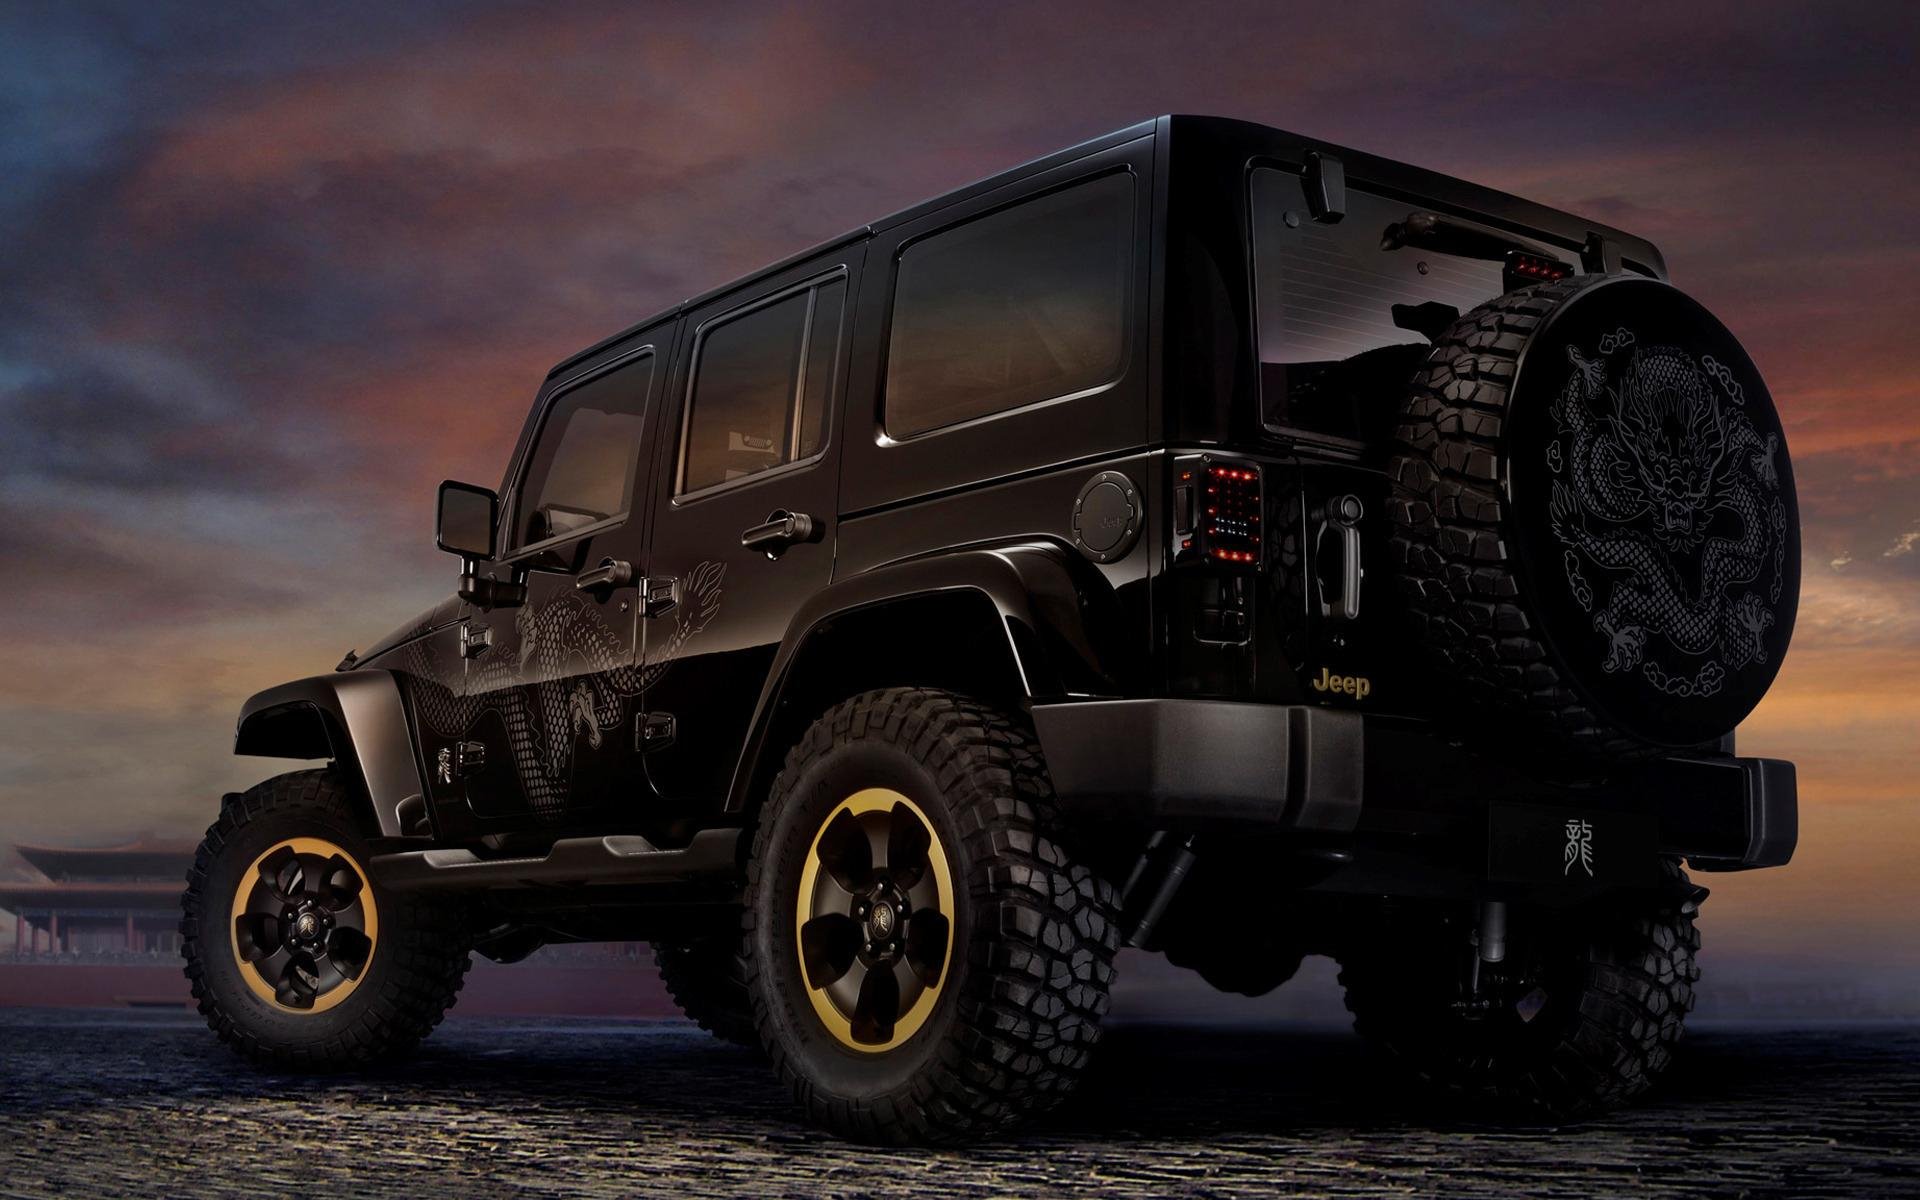 Jeep Wrangler-Dragon Design Full HD Wallpaper and Background Image